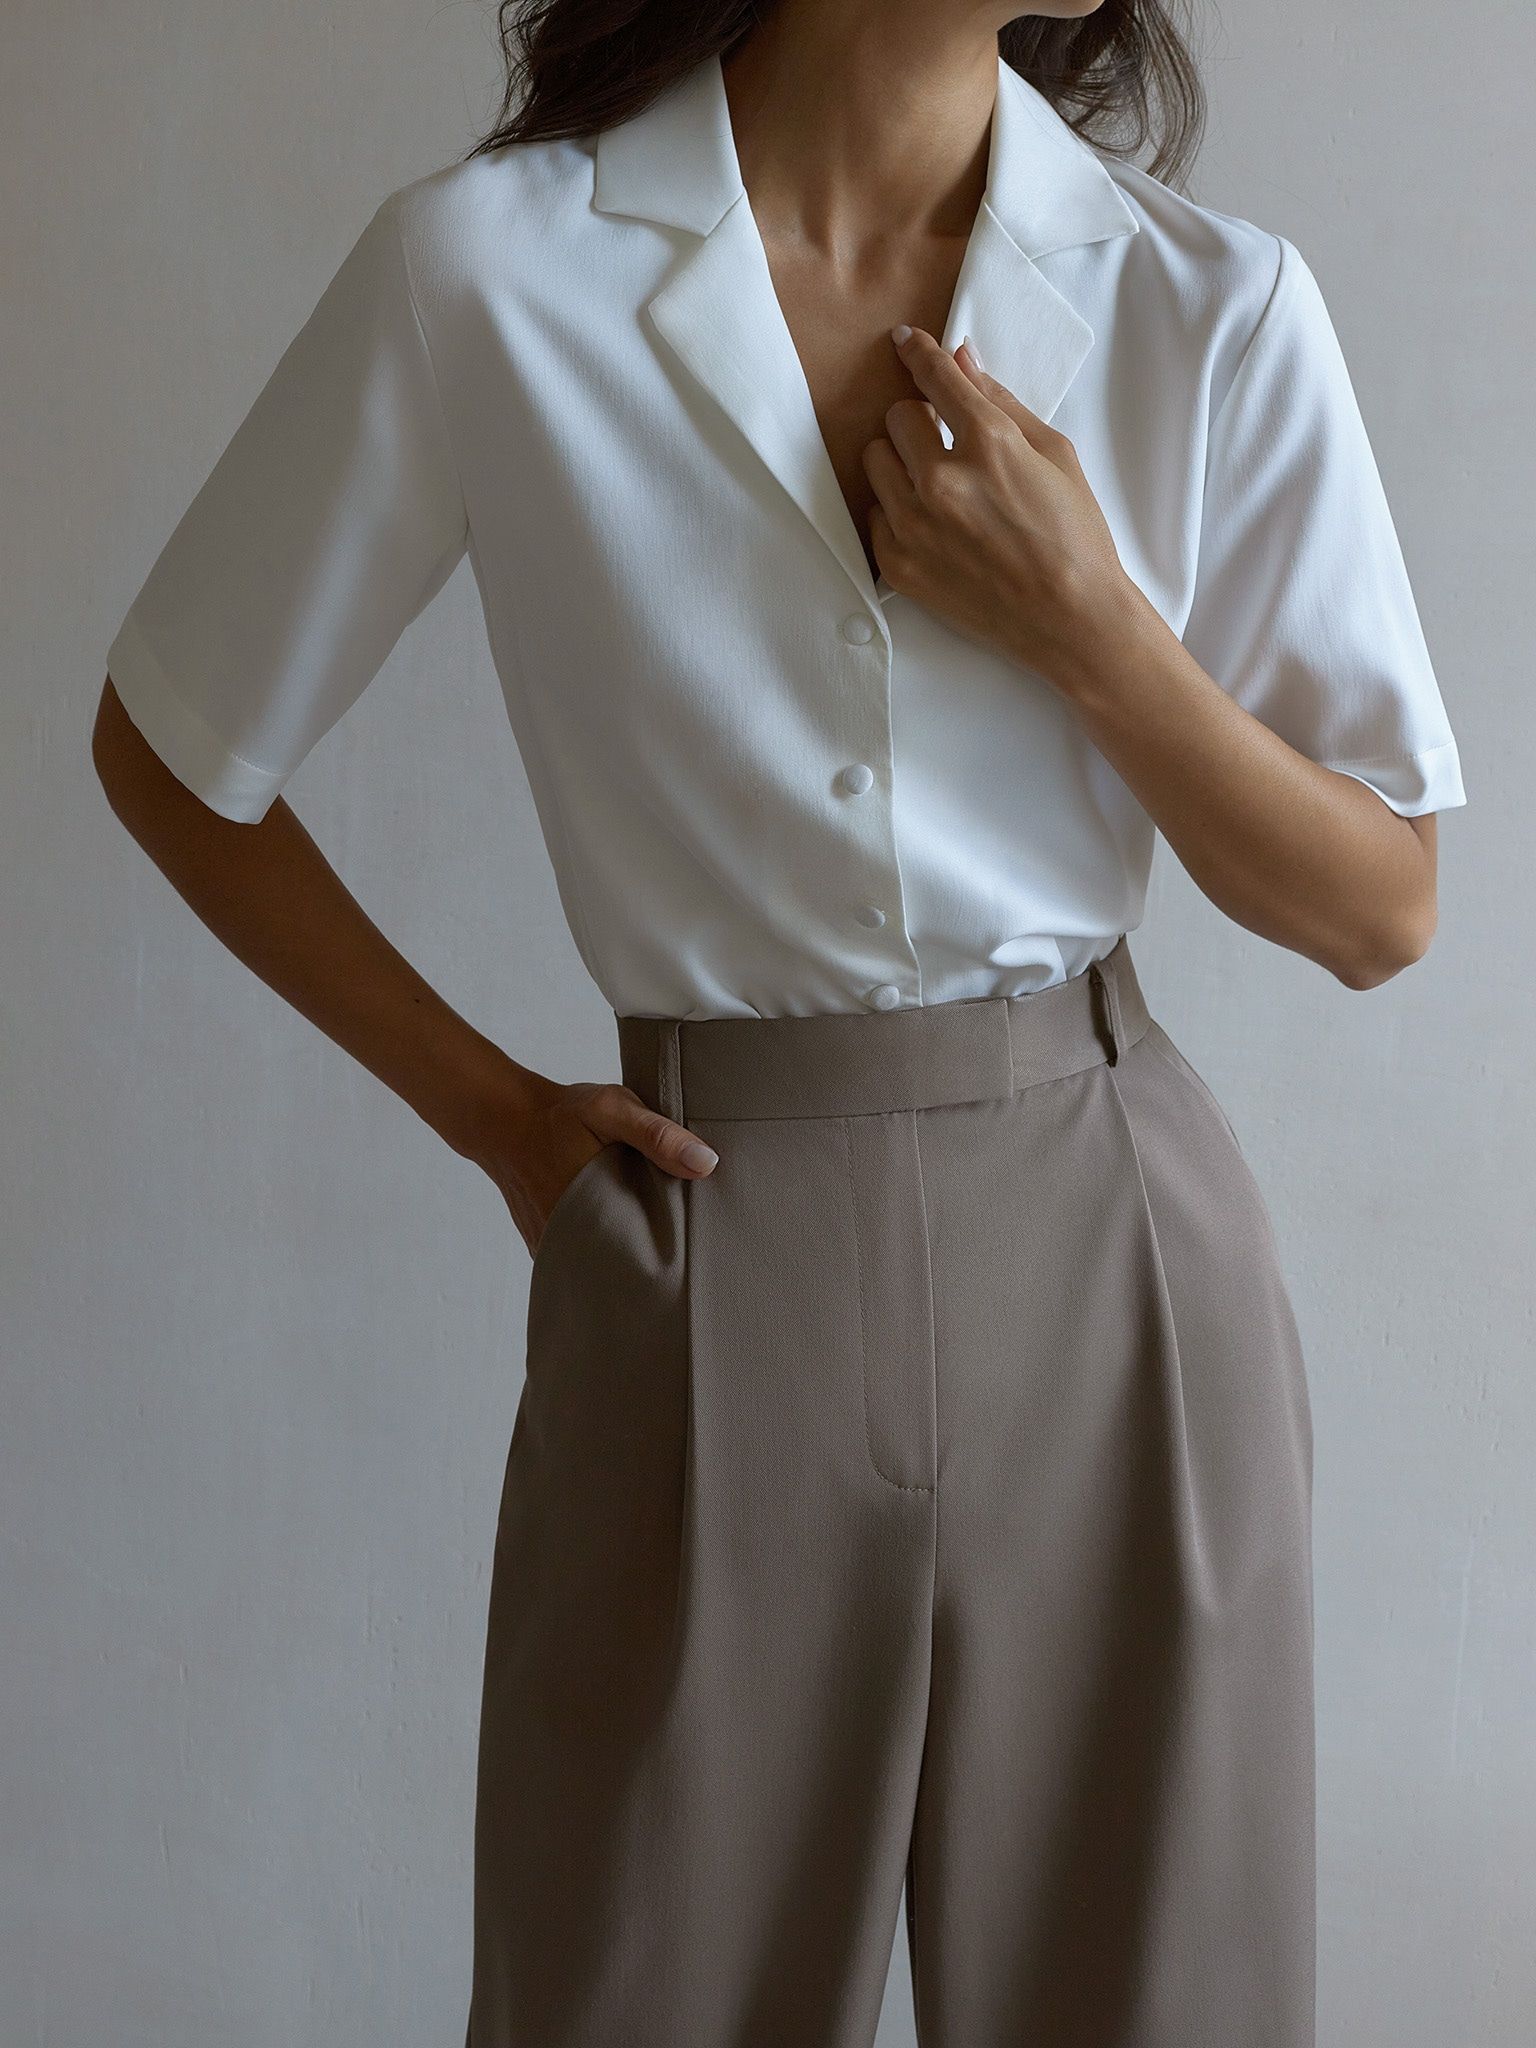 Short and Sweet: Styling Tips for Short Blouses